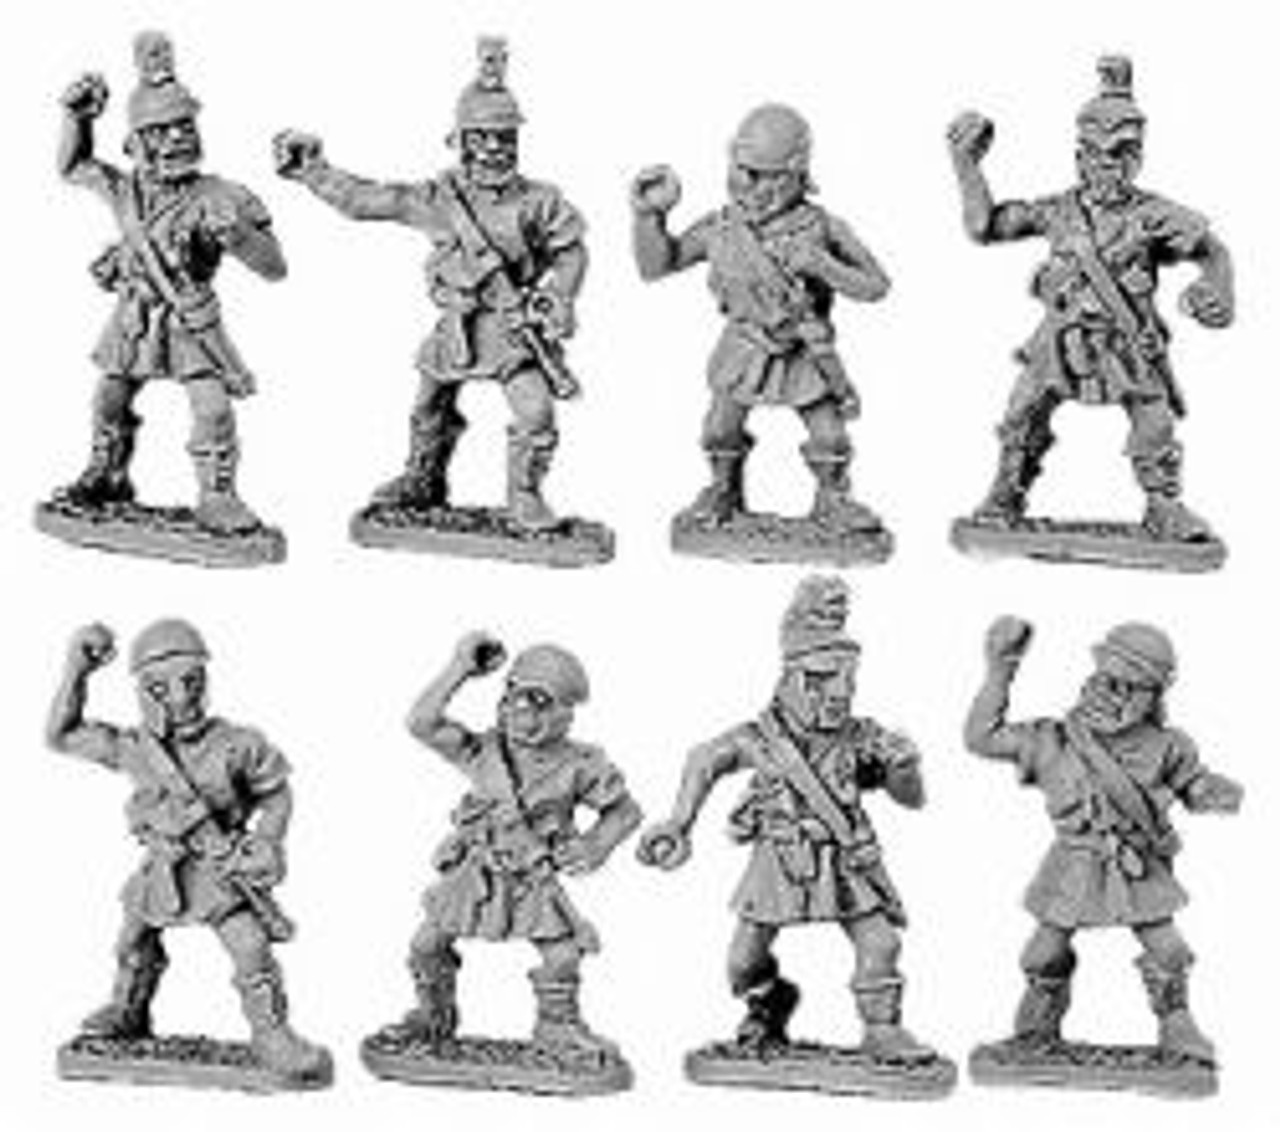 XYS18241 - Peltasts with Attic and Chalkidian Helmets (8)